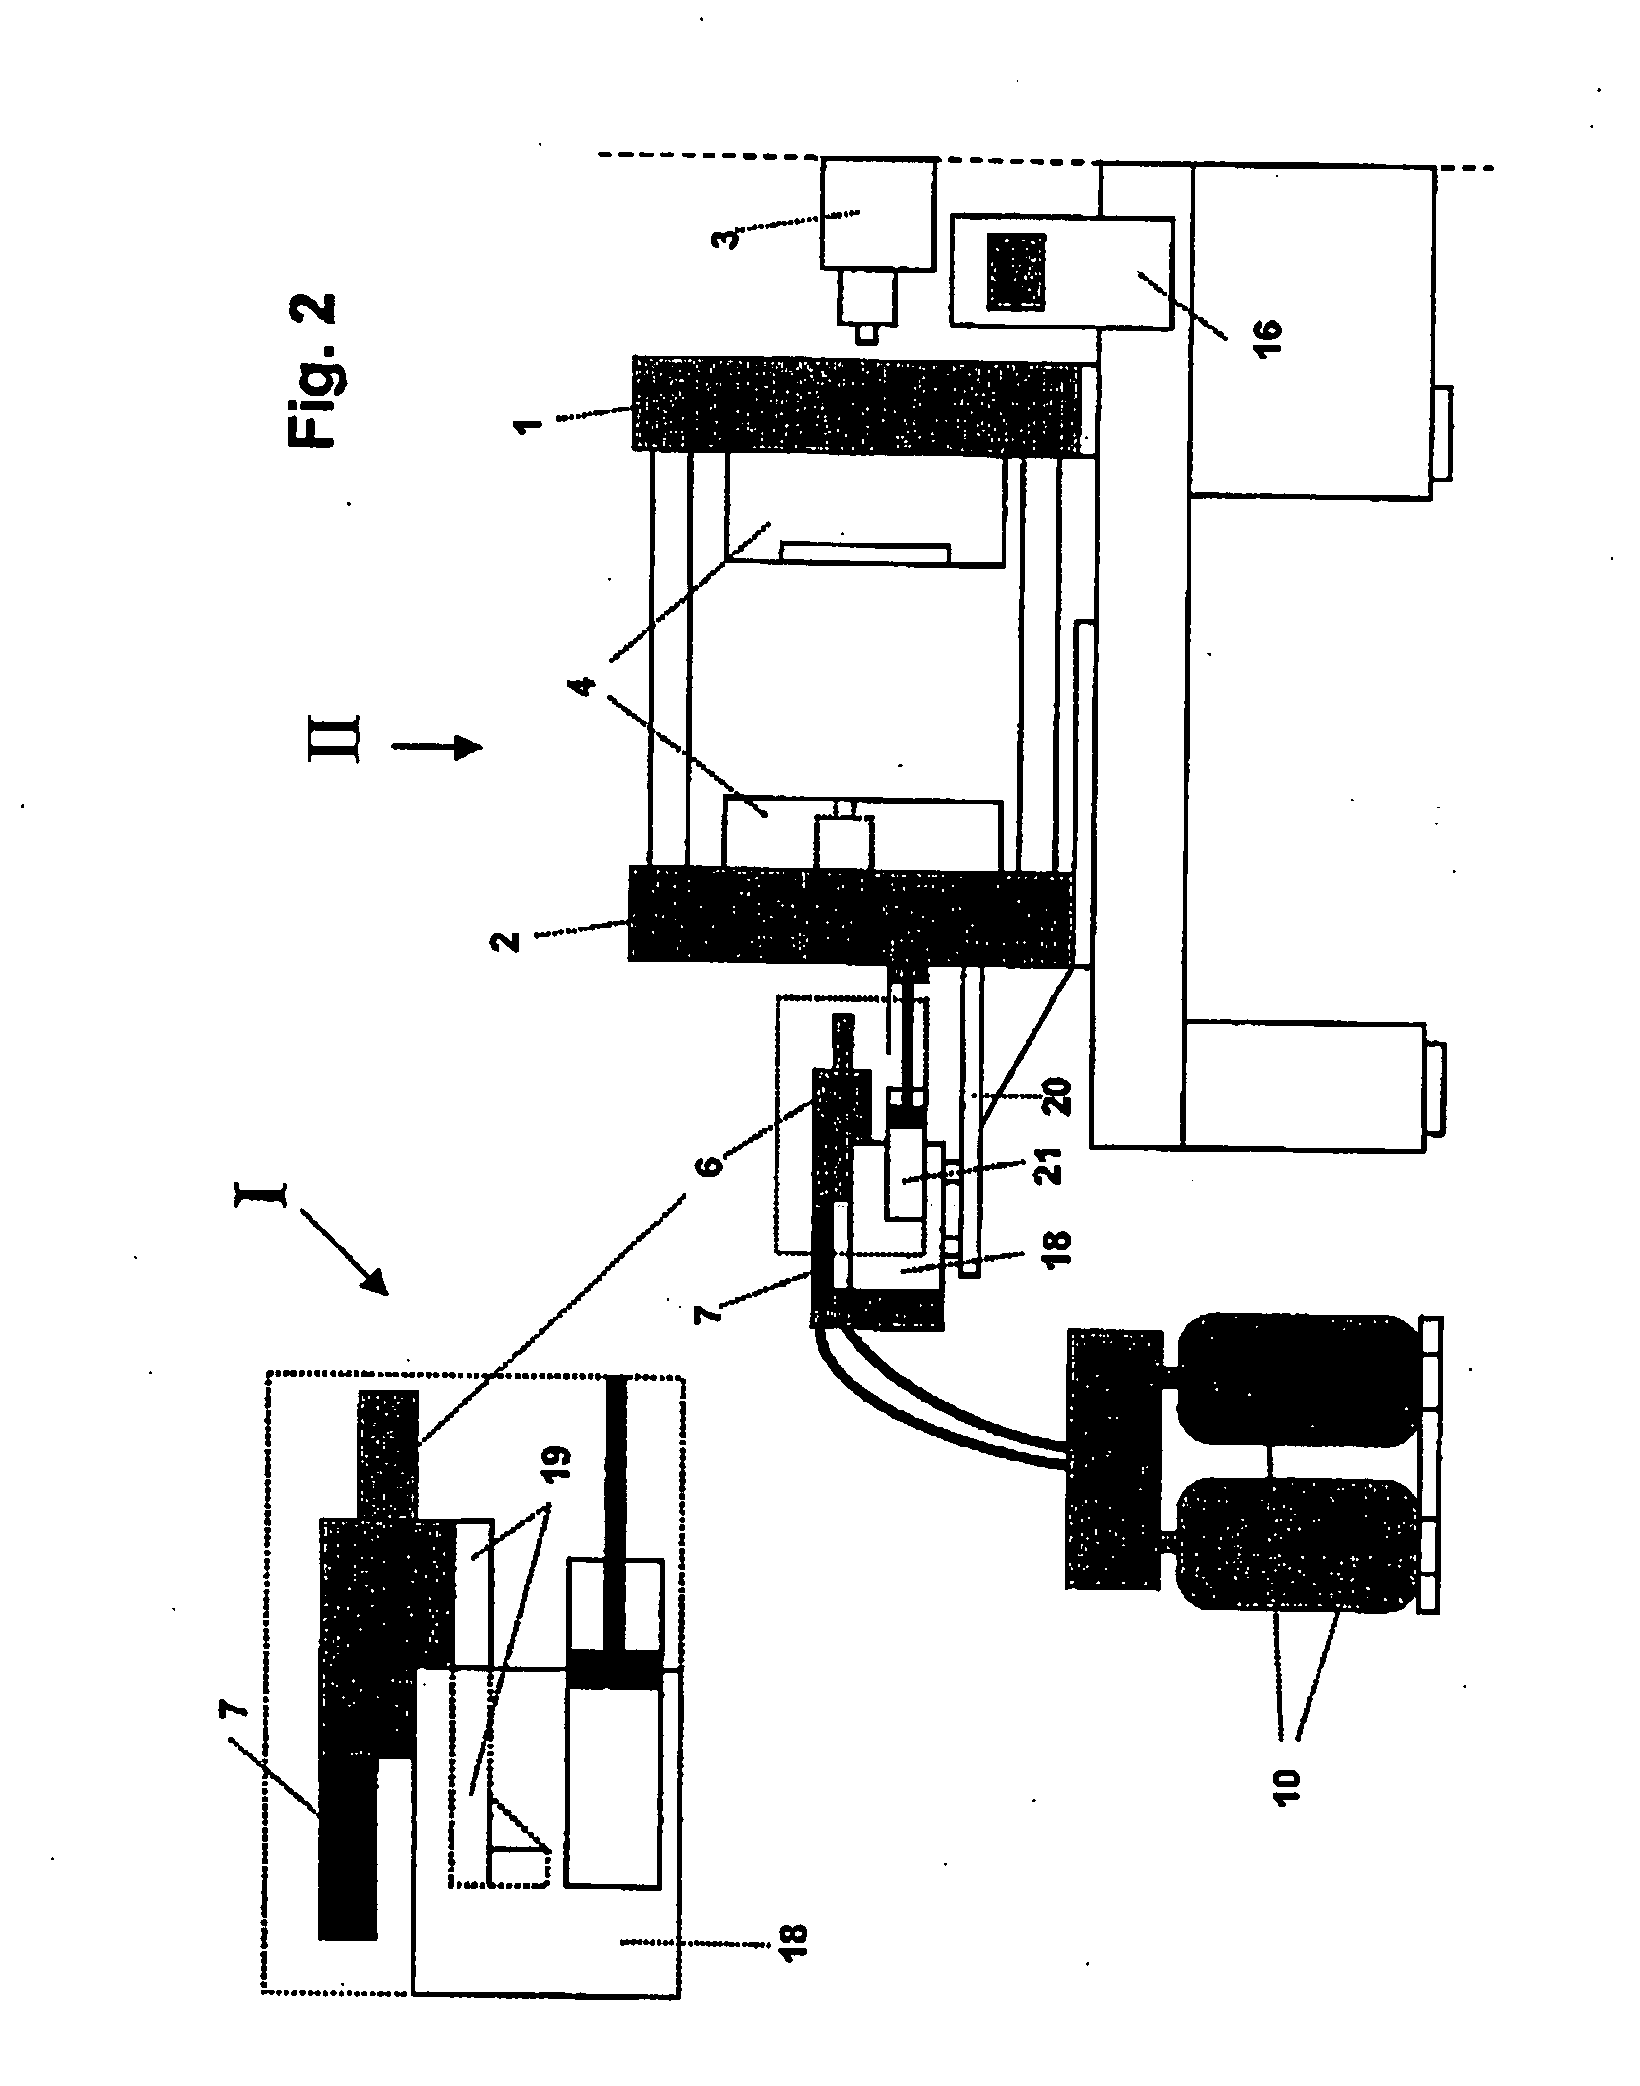 Integrated system for producing composites